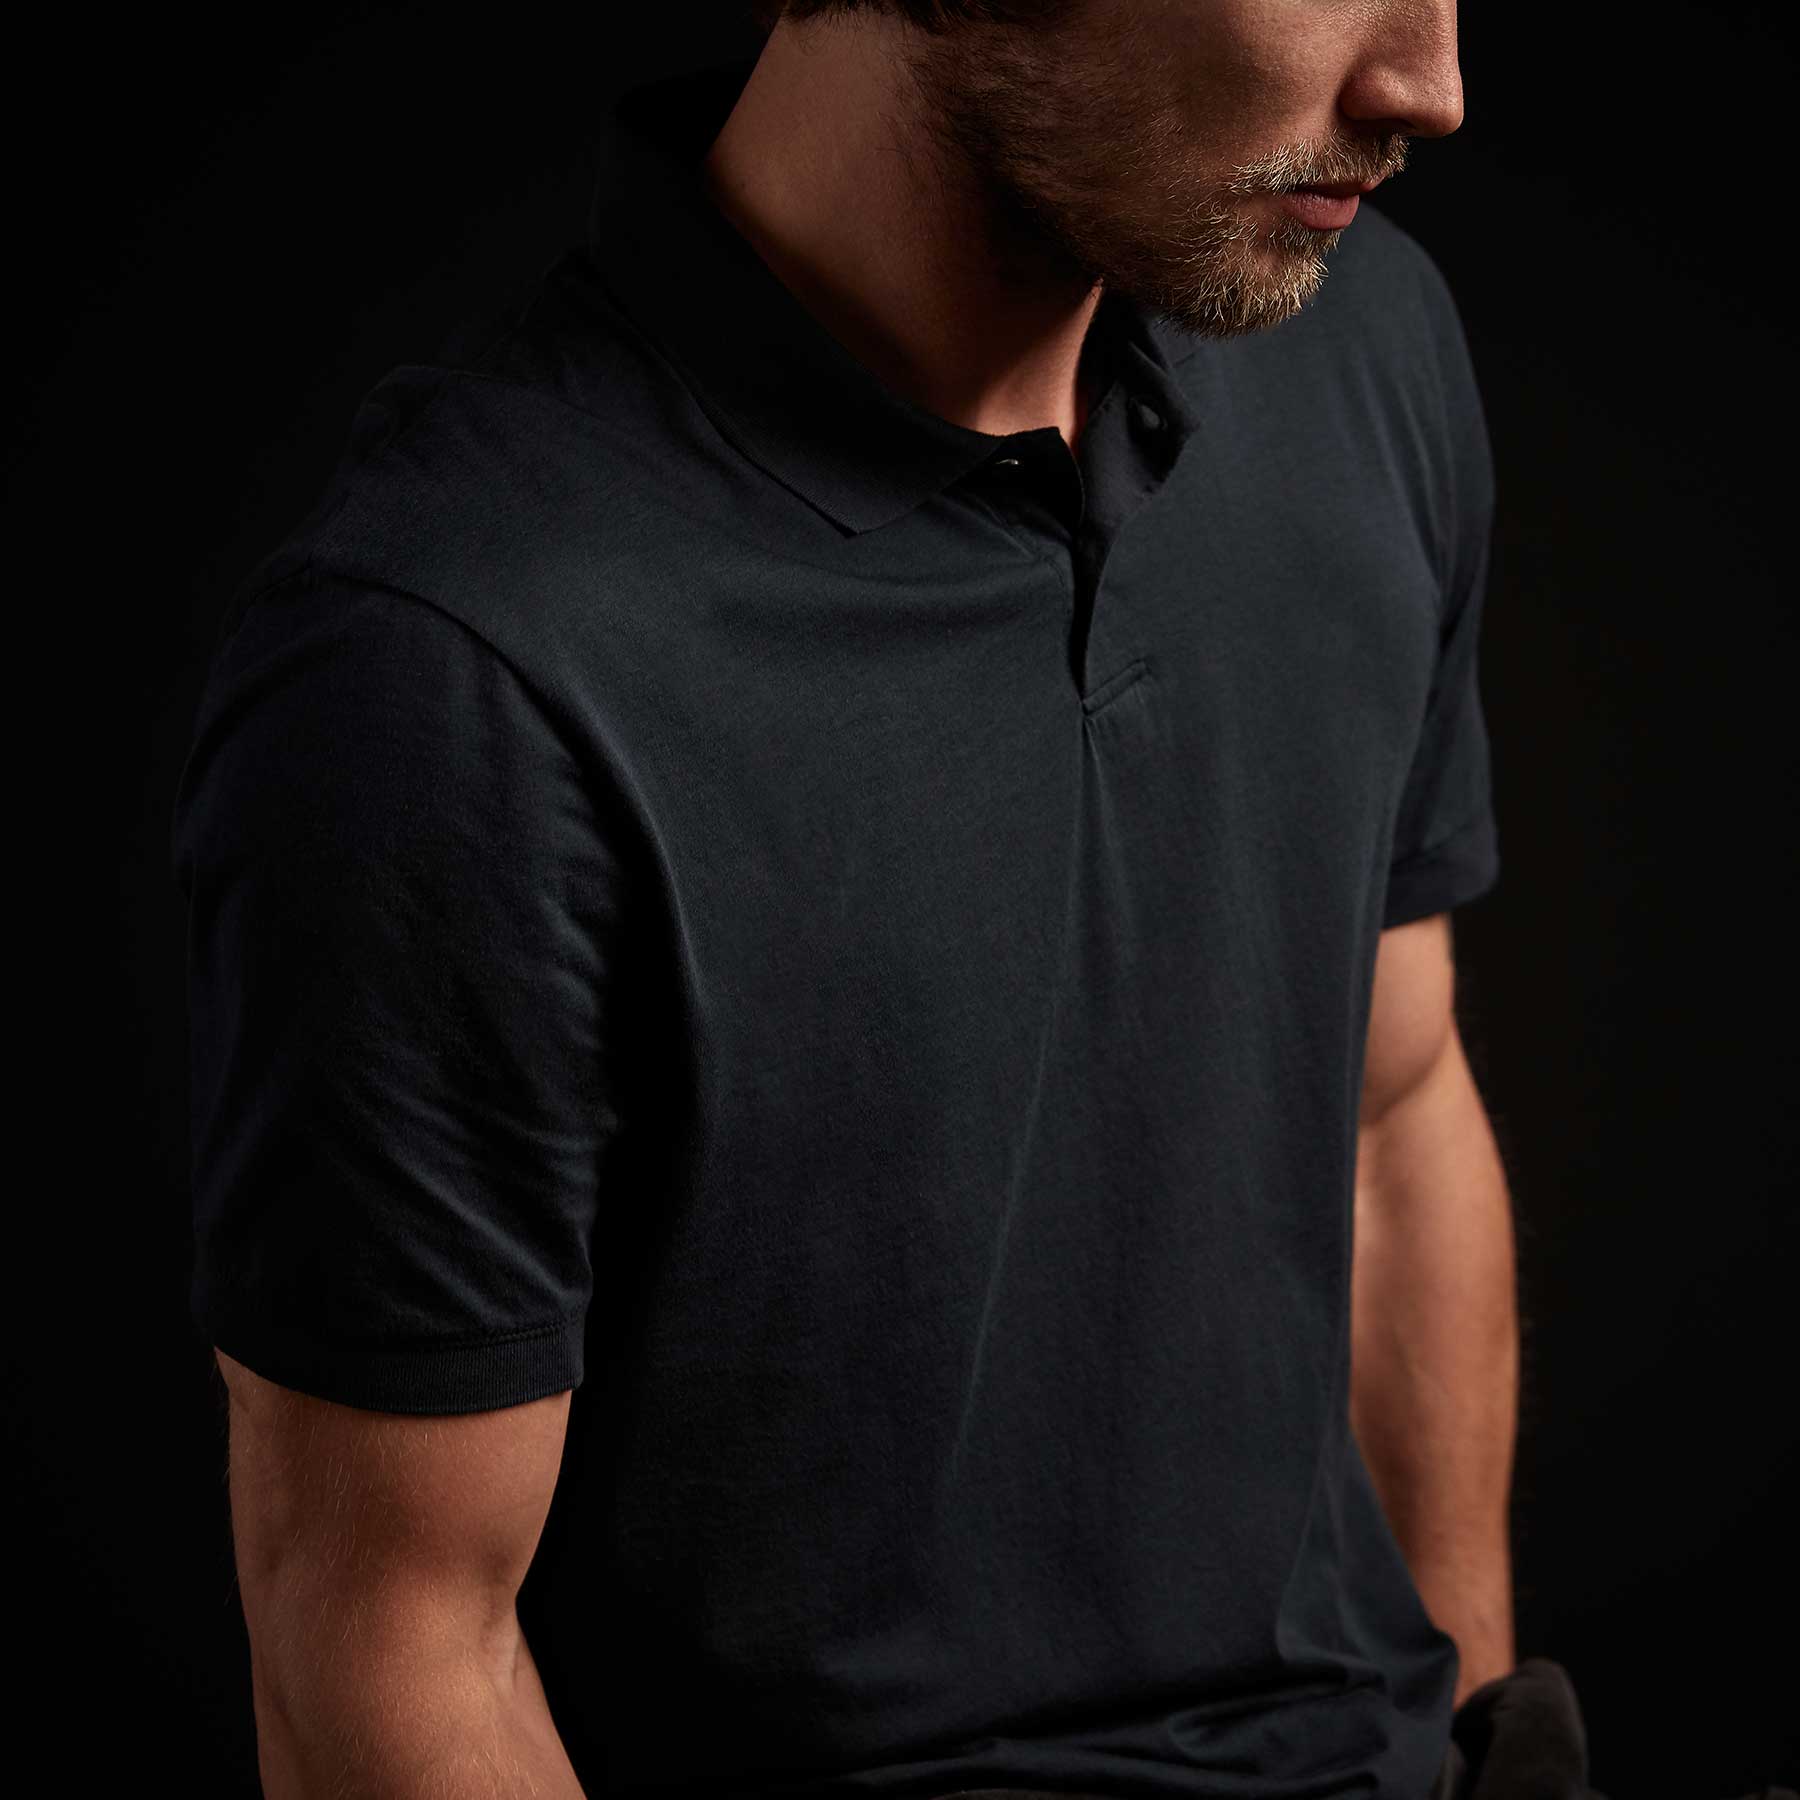 James Perse Elevated Lotus Jersey Polo in French Navy 1/S